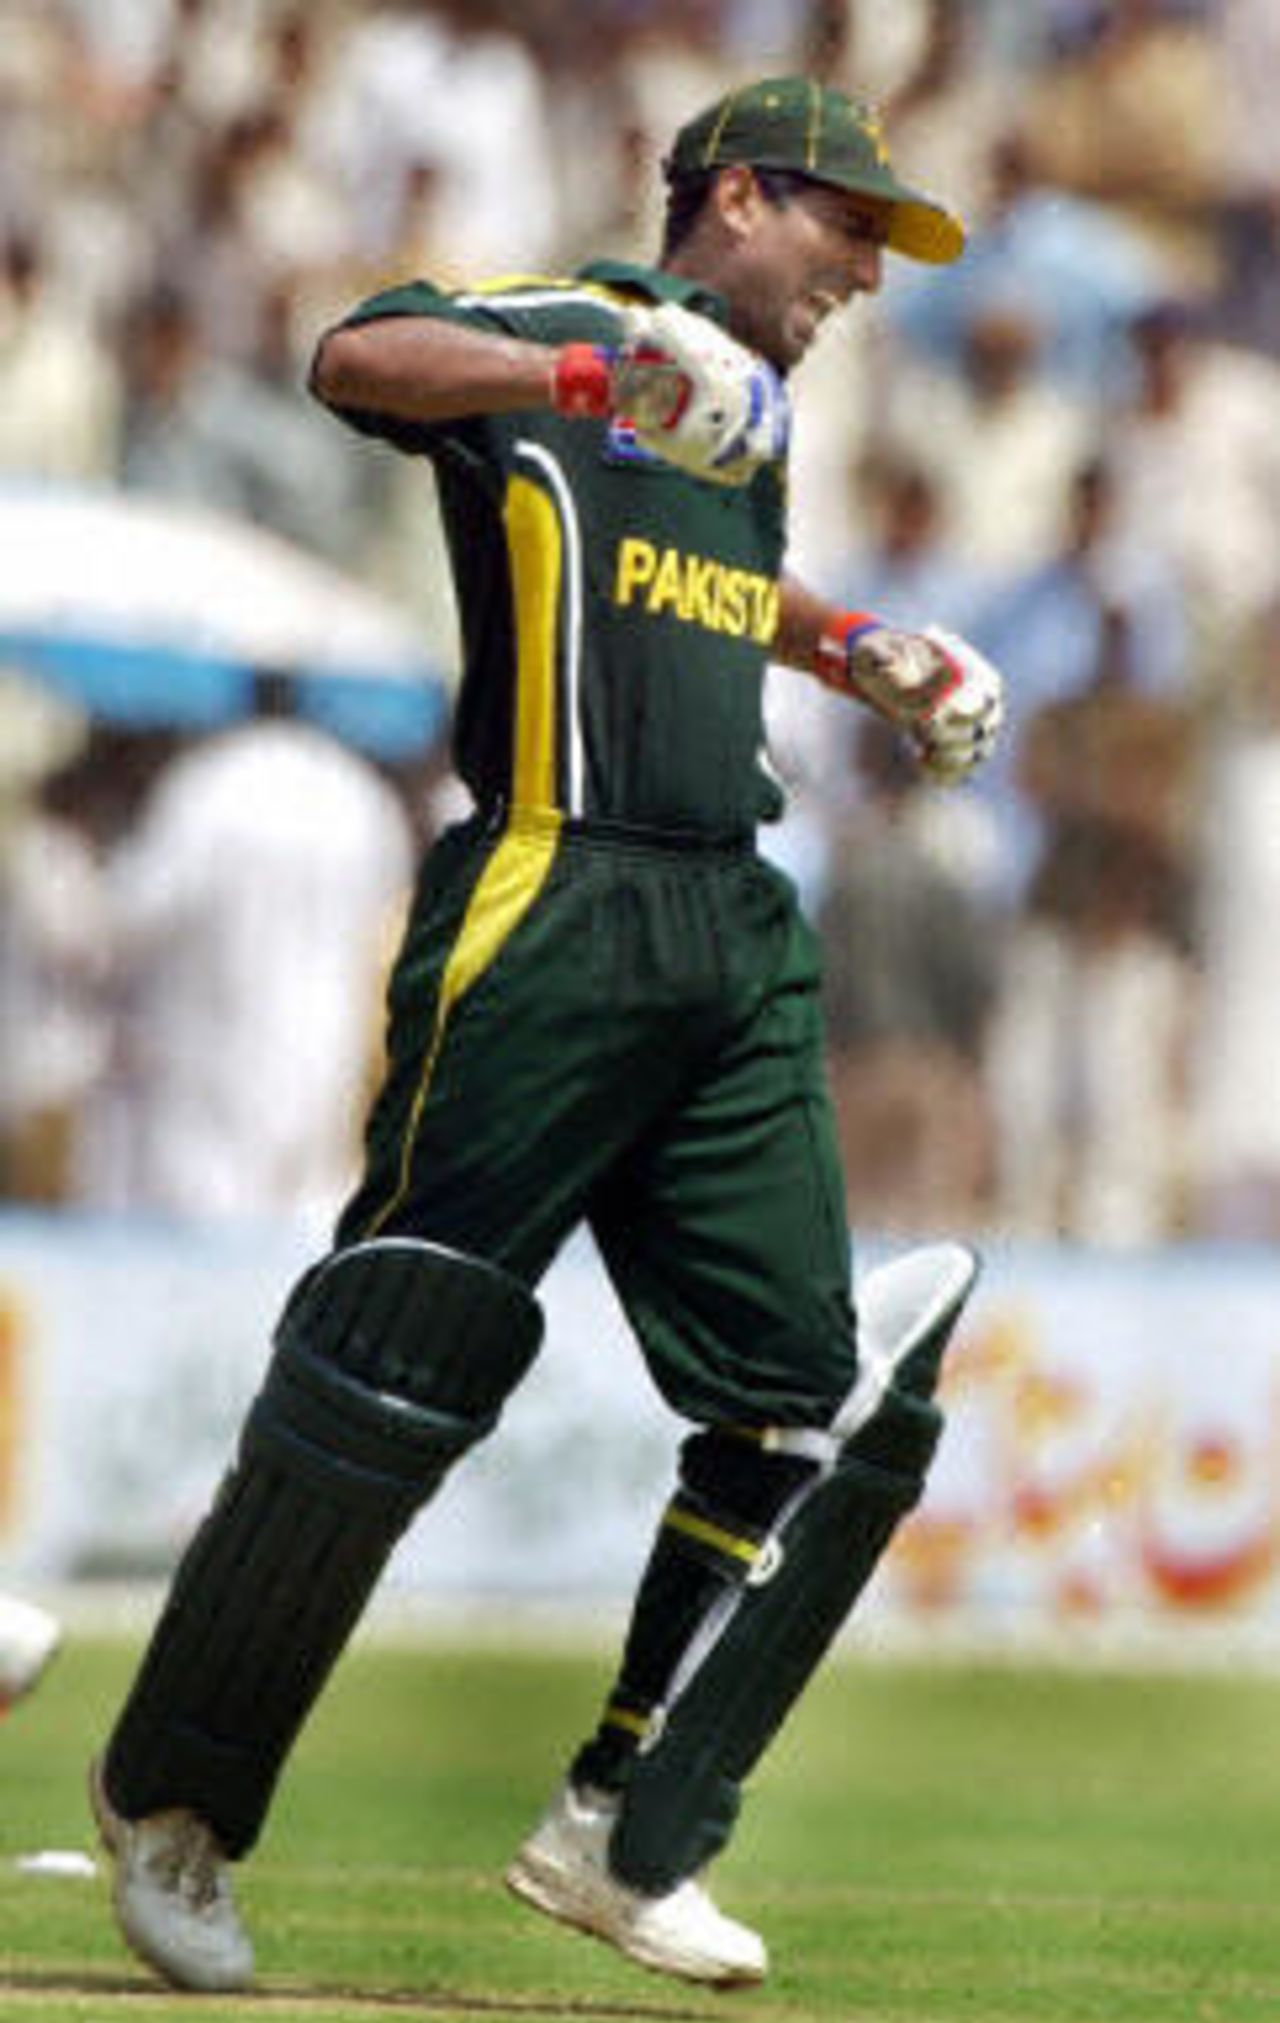 Yousuf Youhana grimaces after being run-out, Pakistan v Bangladesh, 1st ODI, Multan, September 9, 2003.